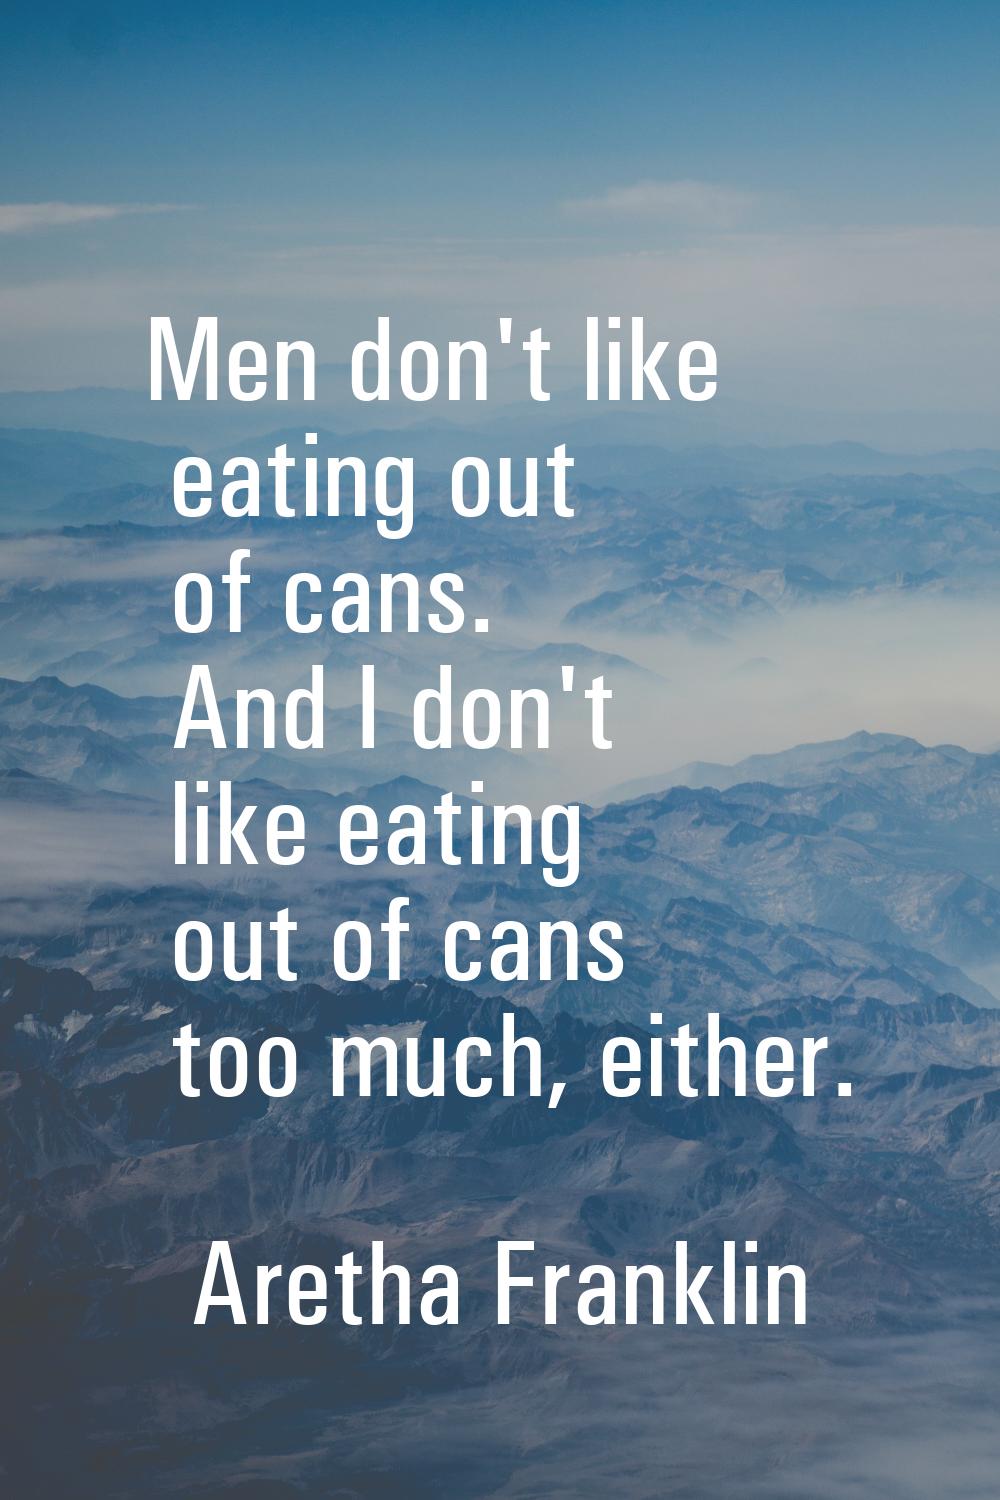 Men don't like eating out of cans. And I don't like eating out of cans too much, either.